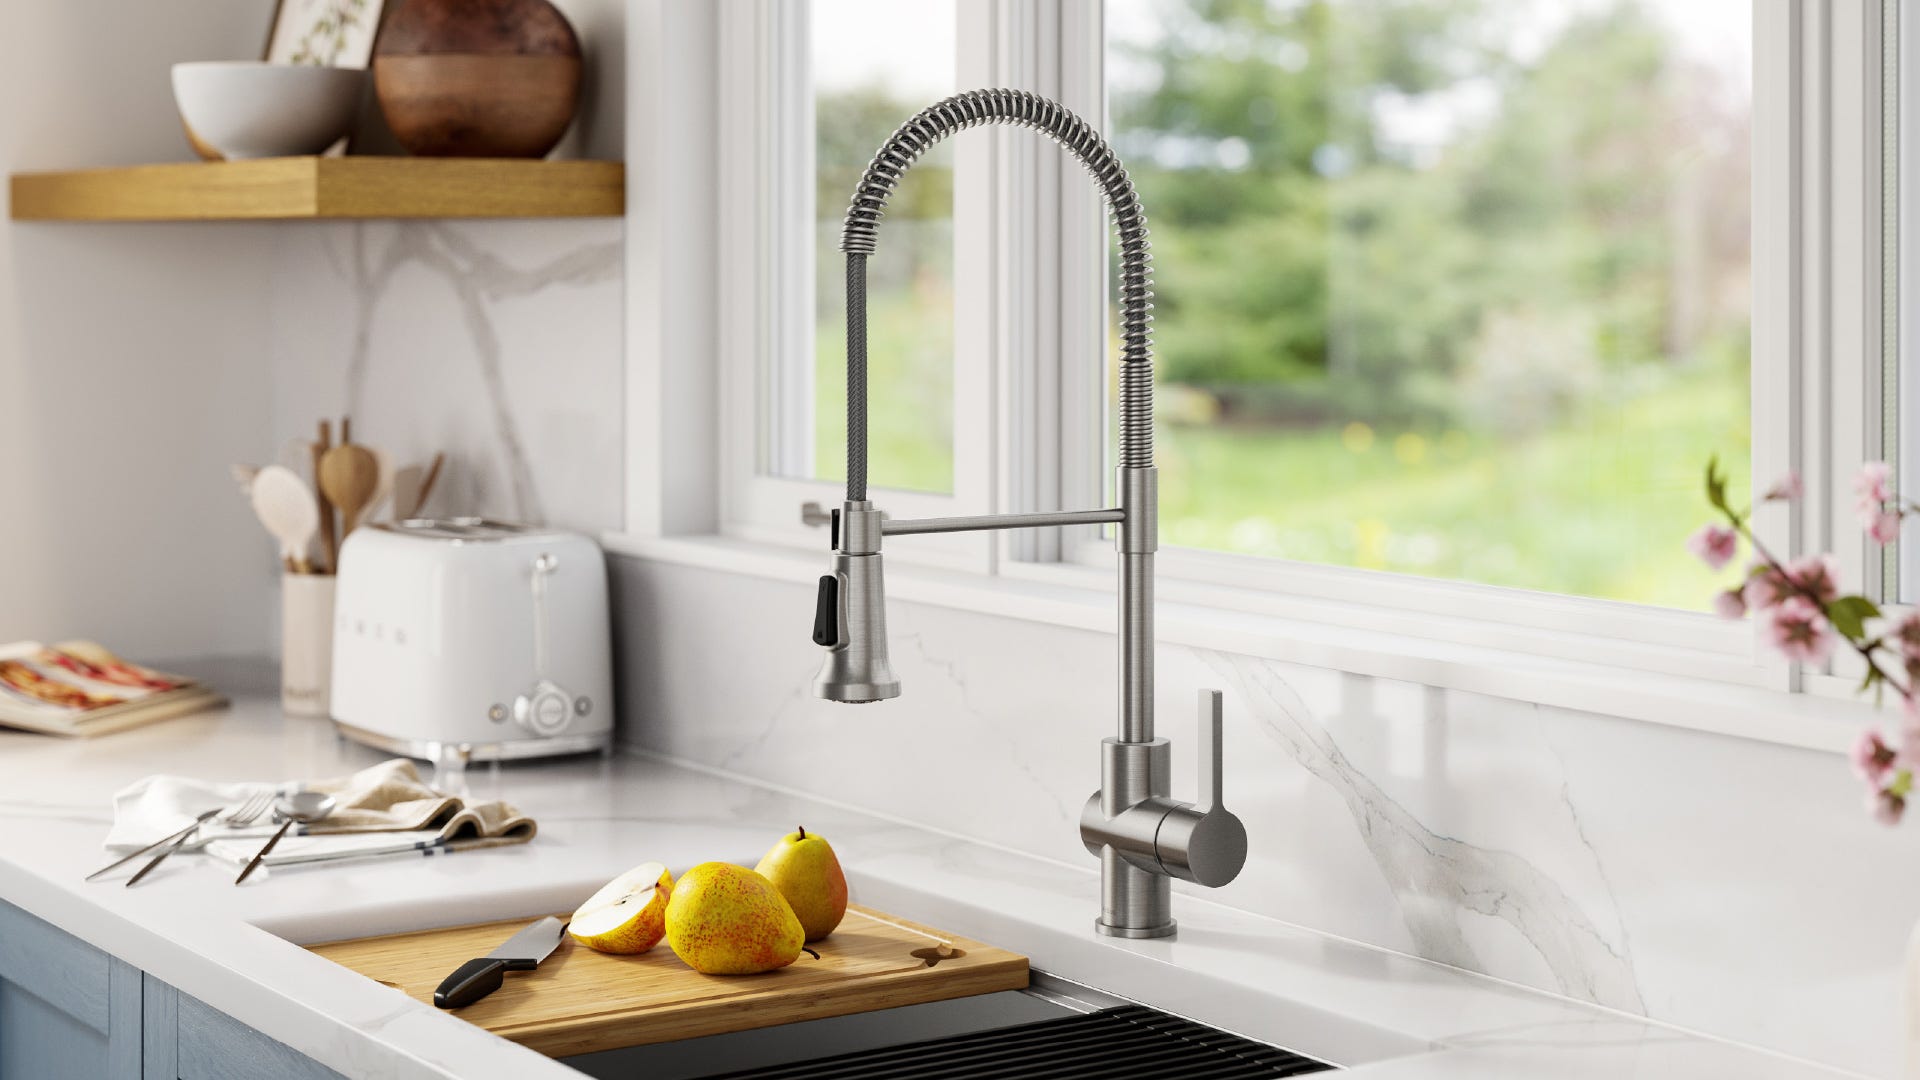 How to Choose the Best Pull-Down Faucet